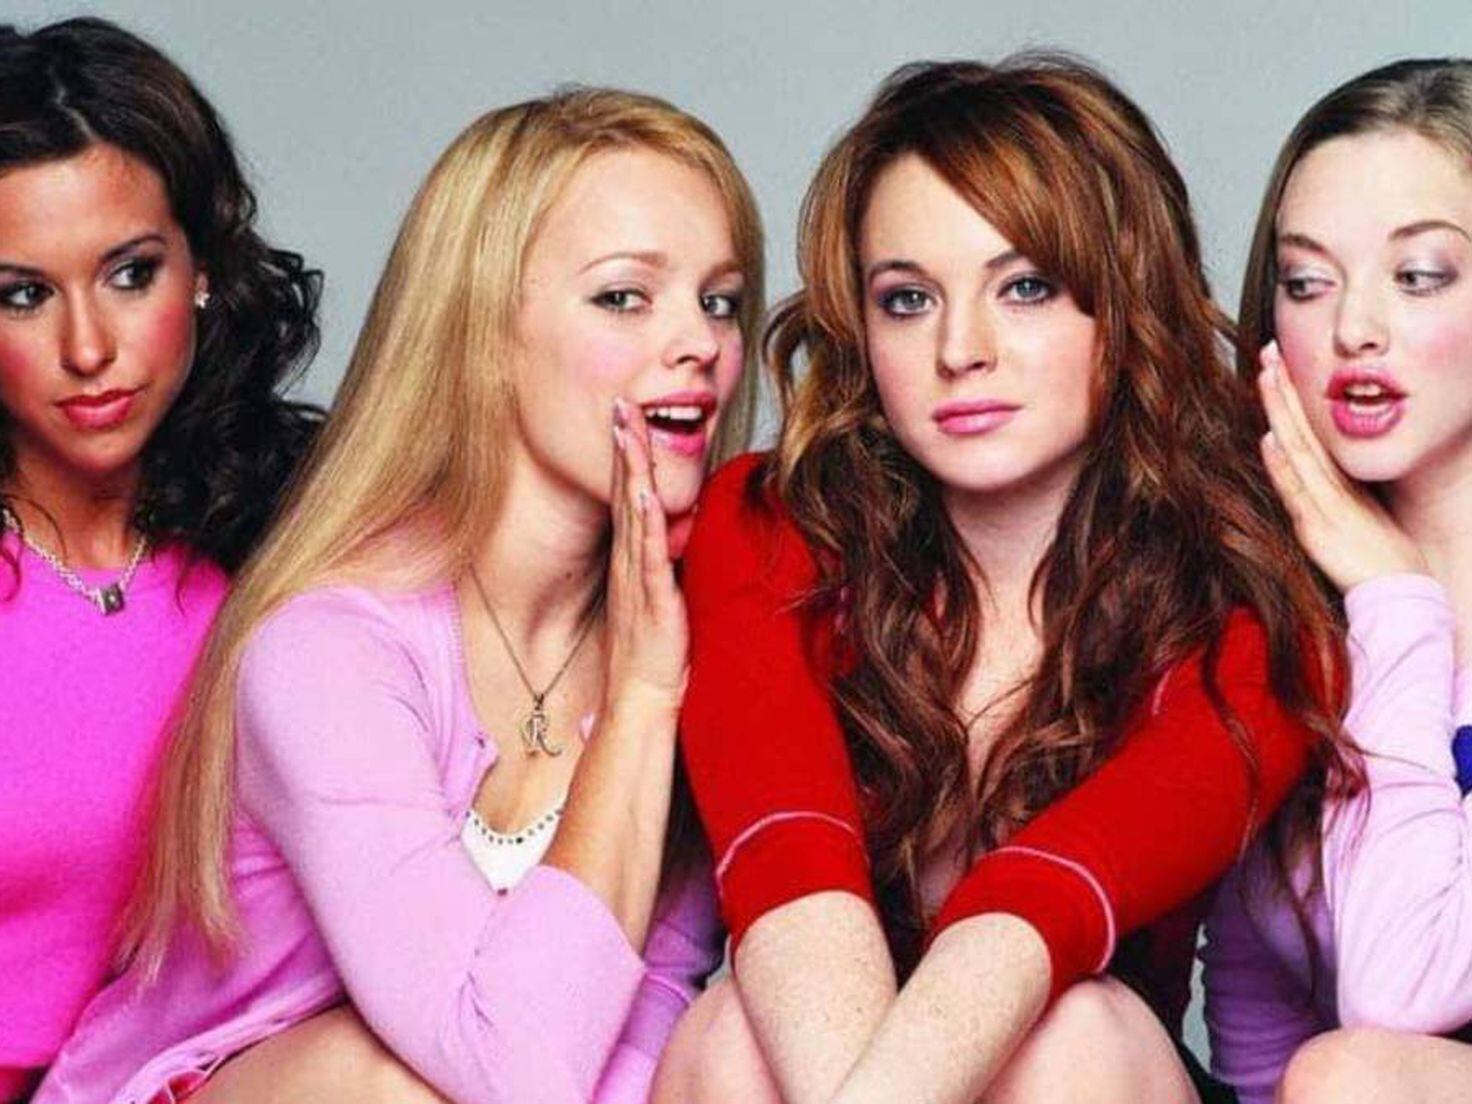 Mean Girls' movie musical adds another star to the fold - AS USA